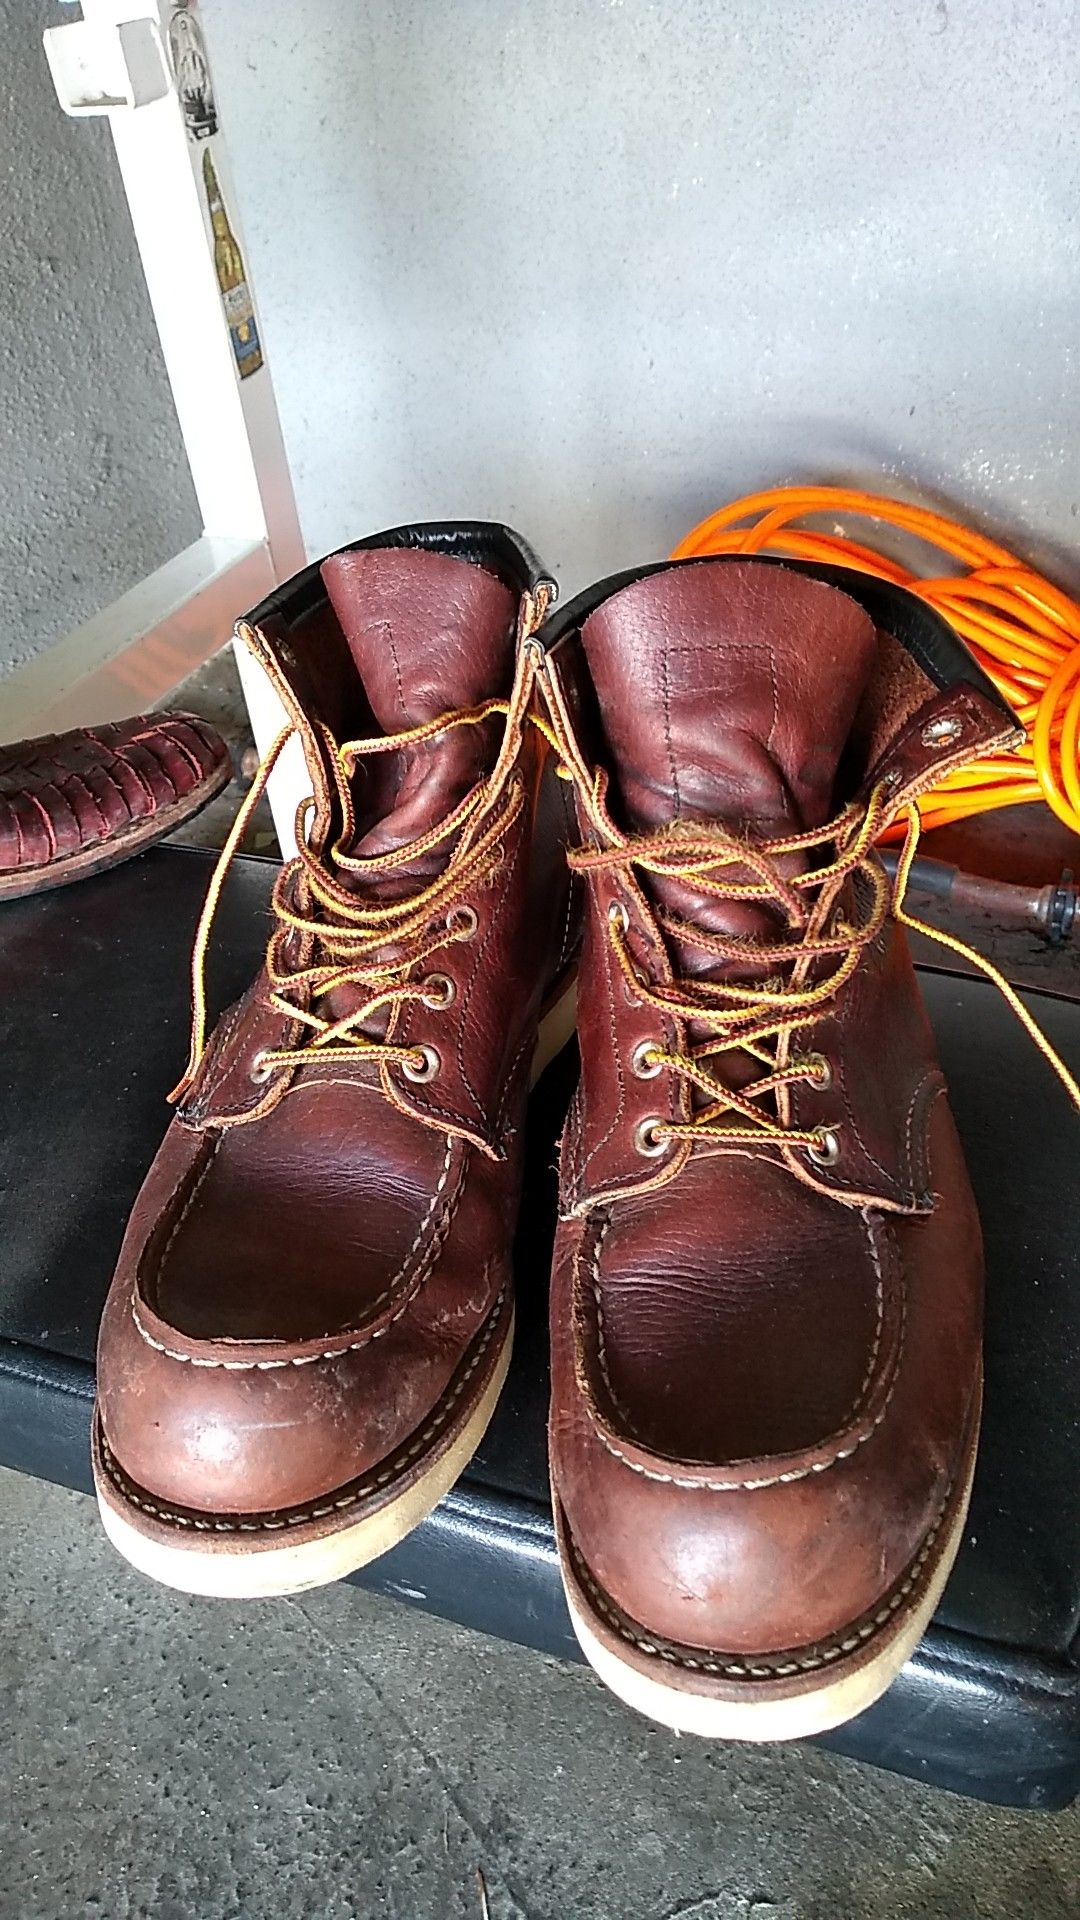 Redwing boots